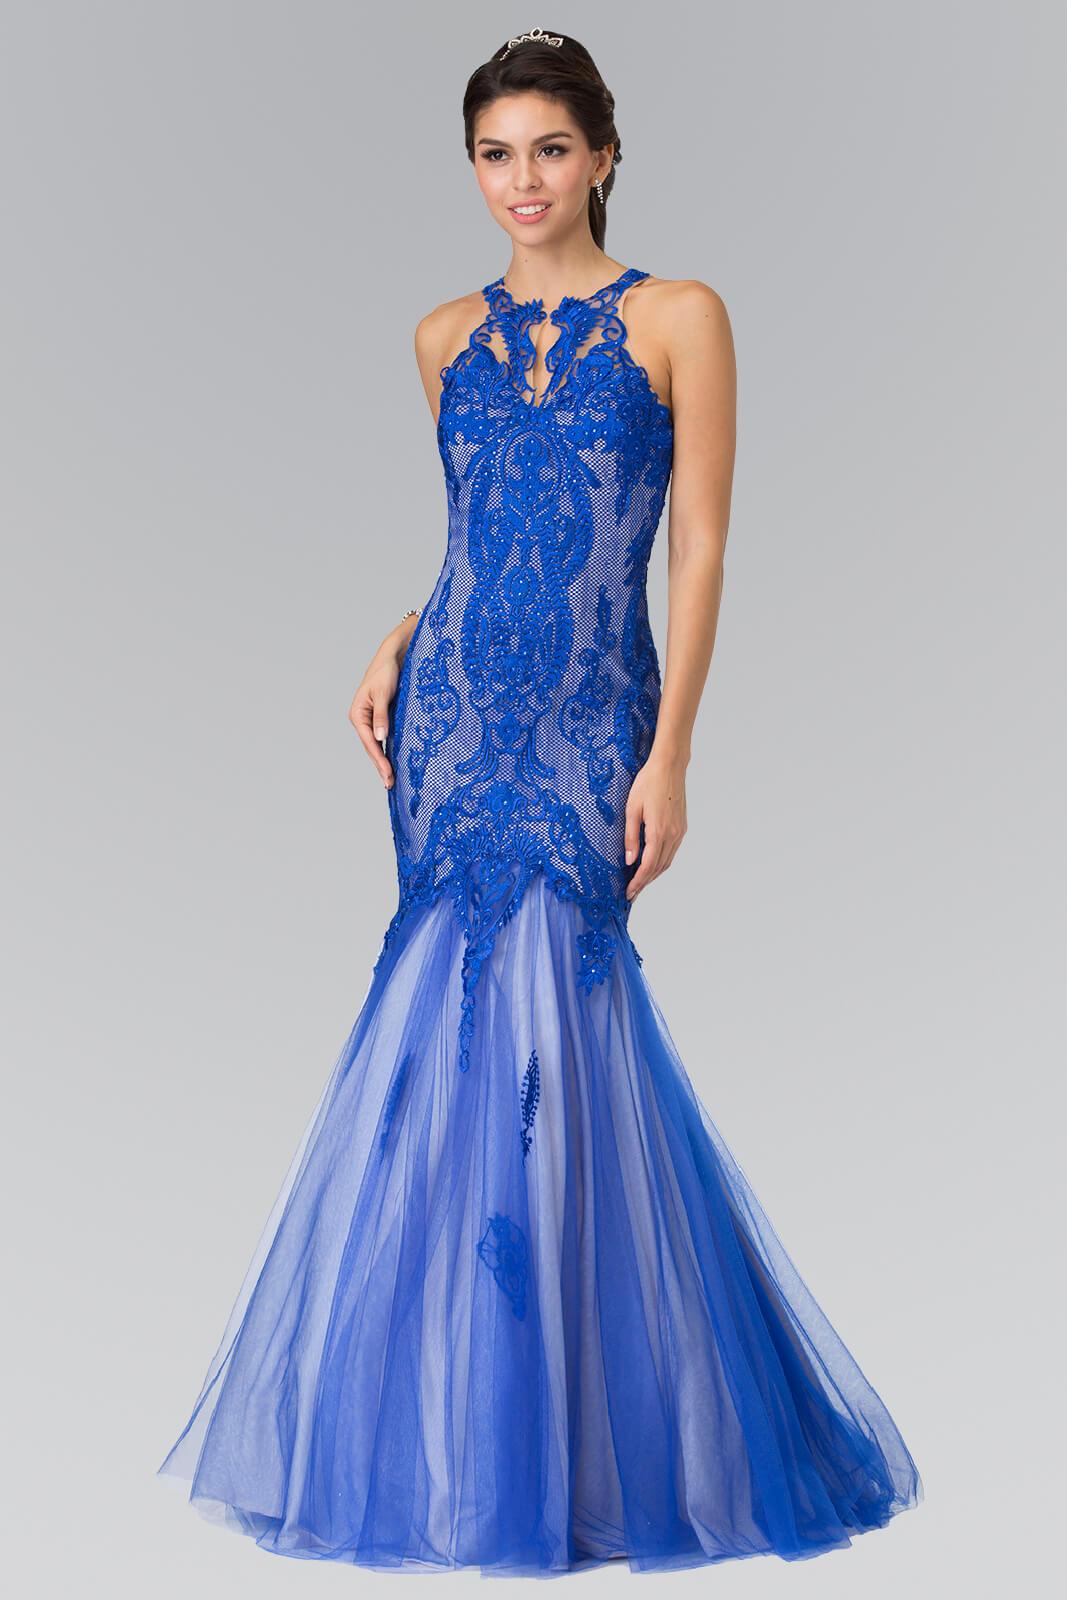 Mermaid Long Prom Halter Homecoming Gown - The Dress Outlet Elizabeth K